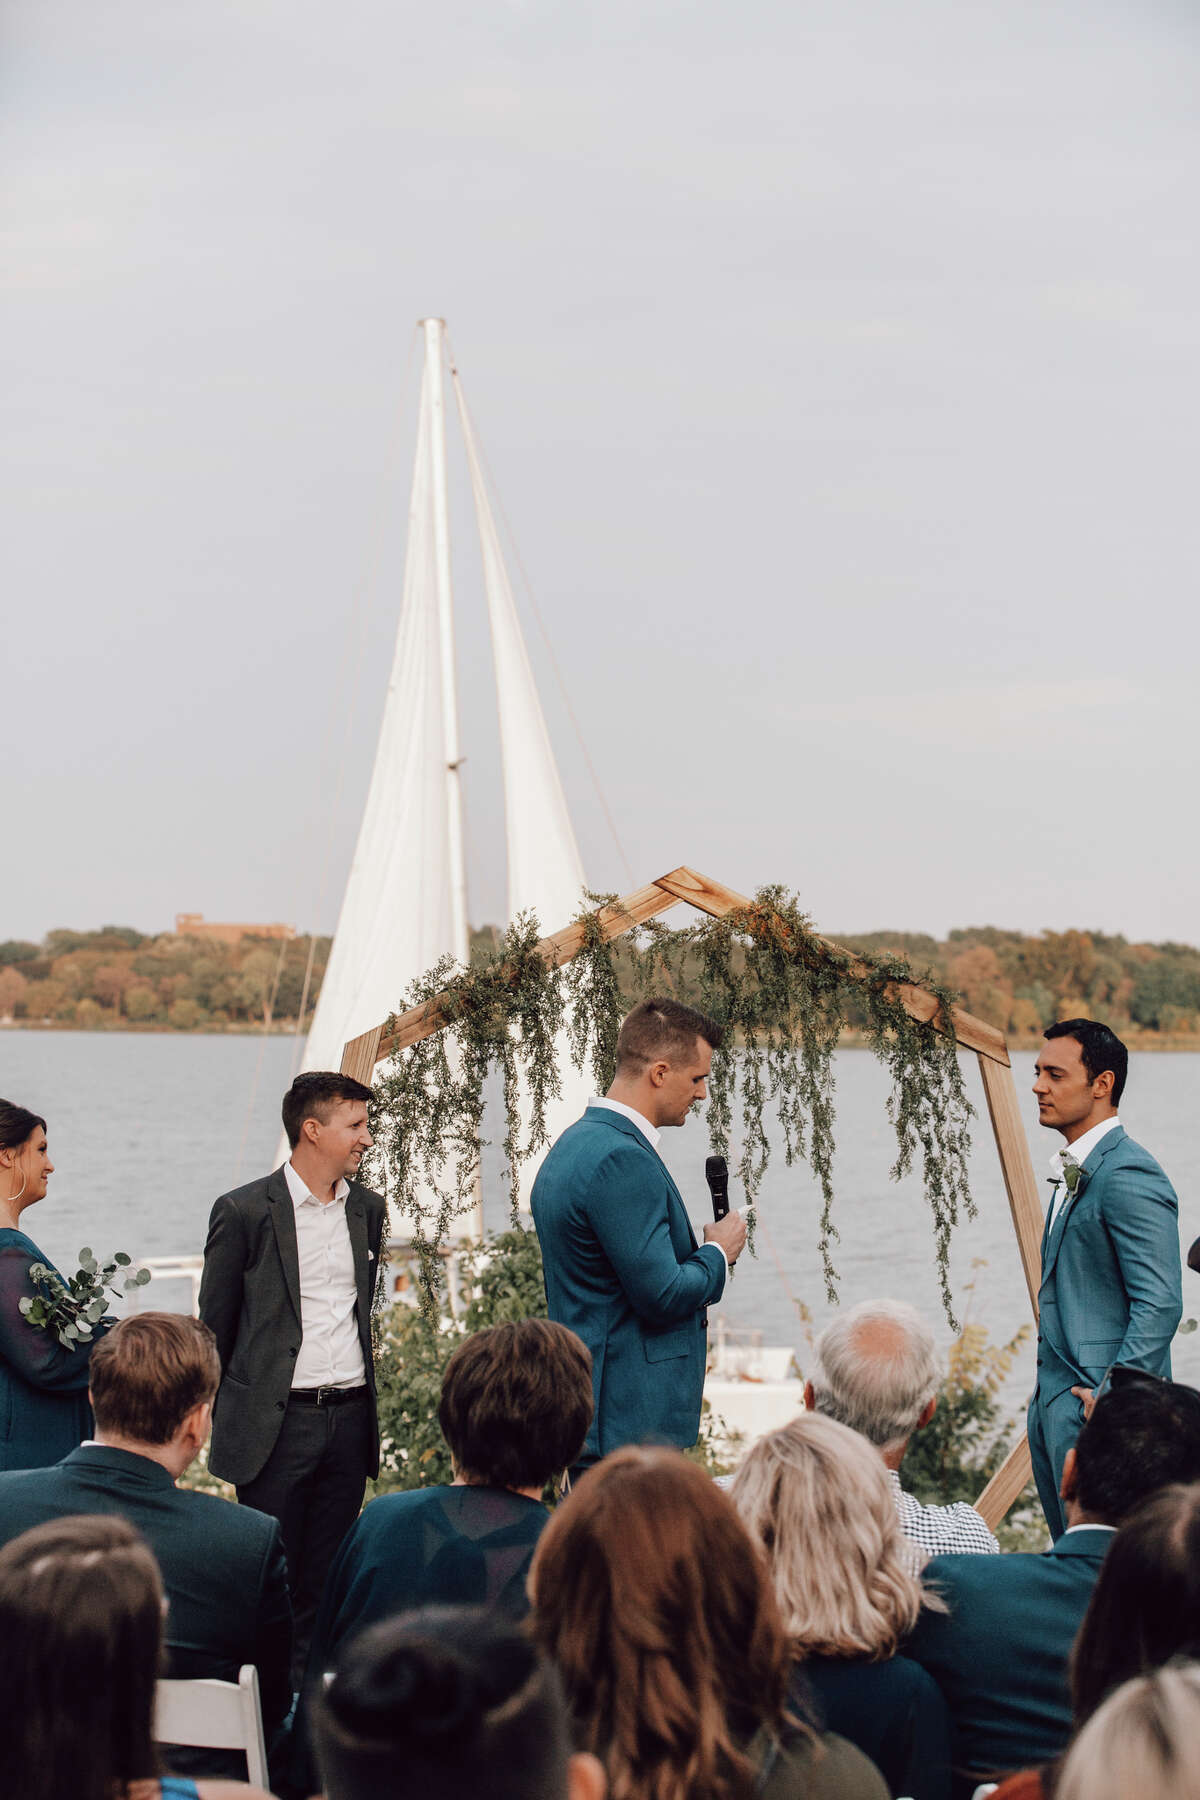 On Oct. 2, the groom and groom exchanged vows in front of 125 guests at the Filter Building on White Rock Lake in Dallas. 